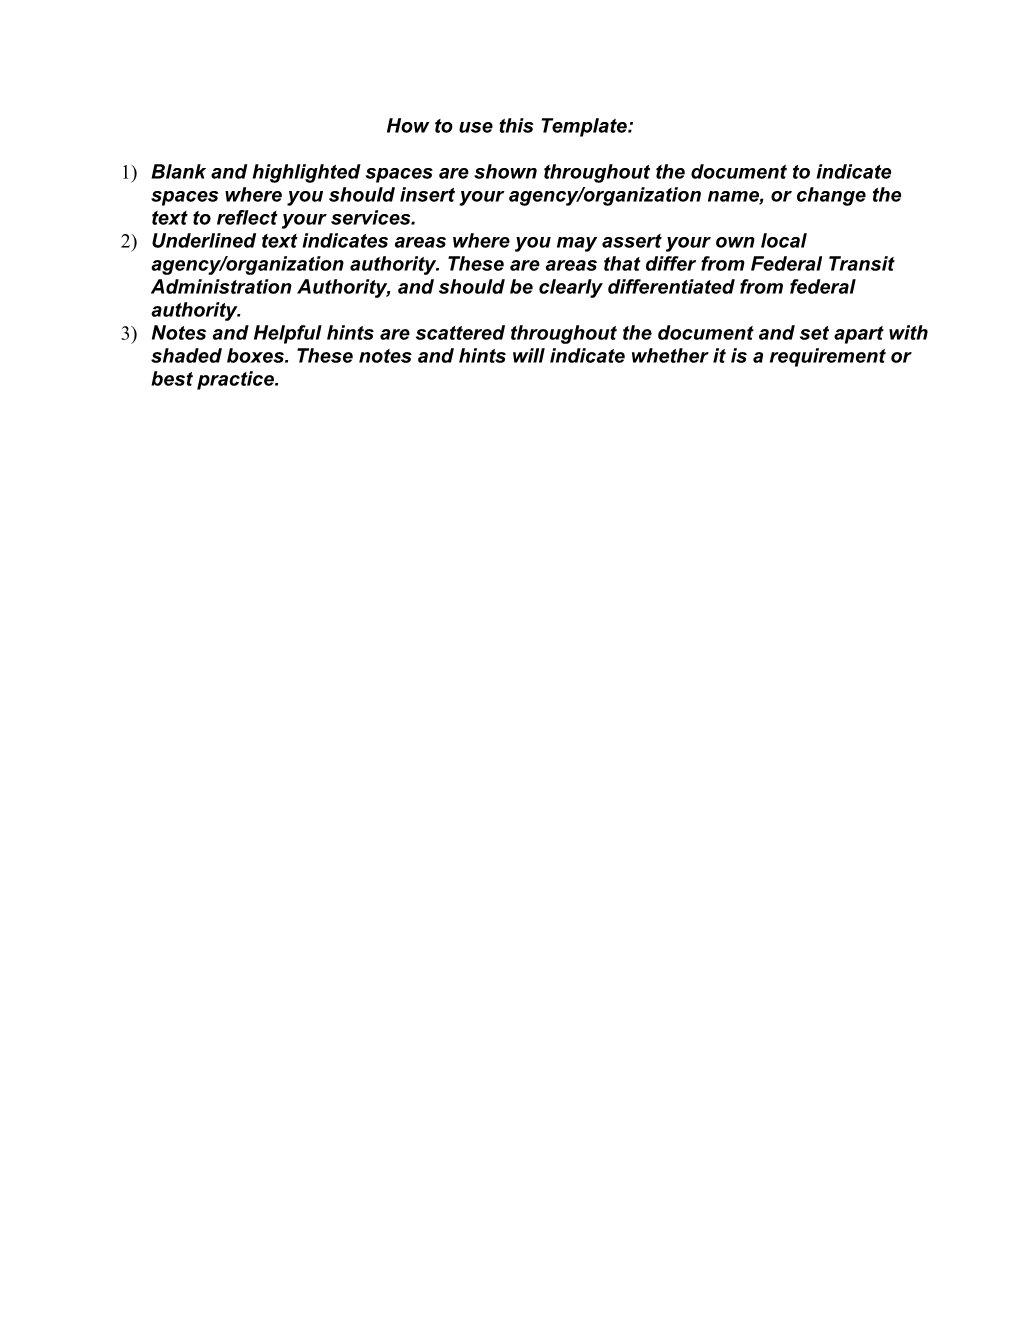 Drug & Alcohol Testing Policy Template